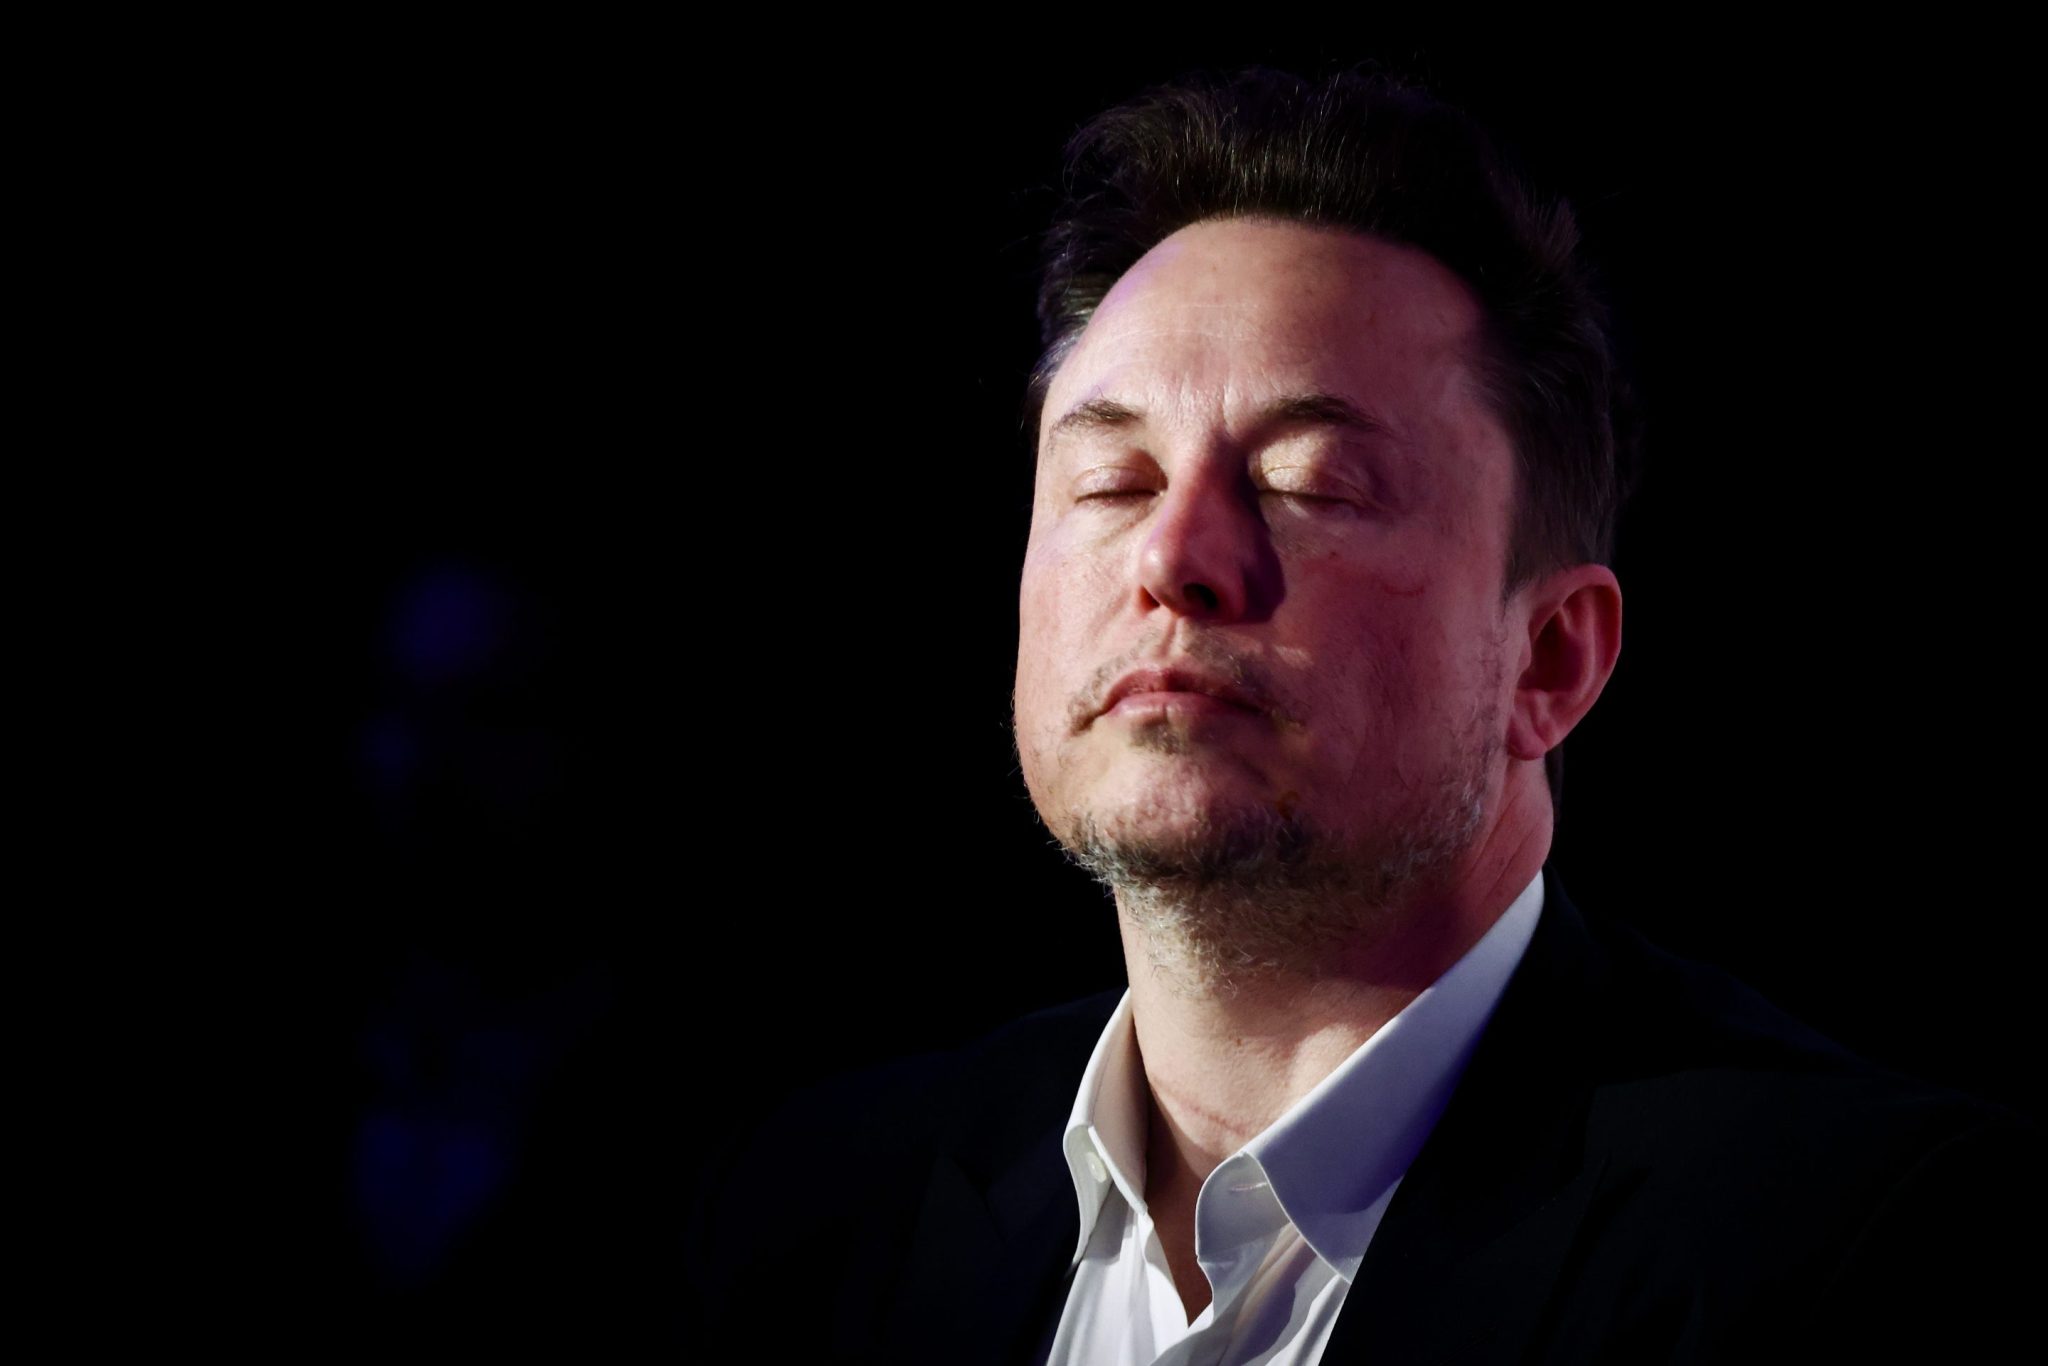 Elon Musk’s $250 billion Tesla losing streak takes another lurch downward on reports of a production cut at his China plant